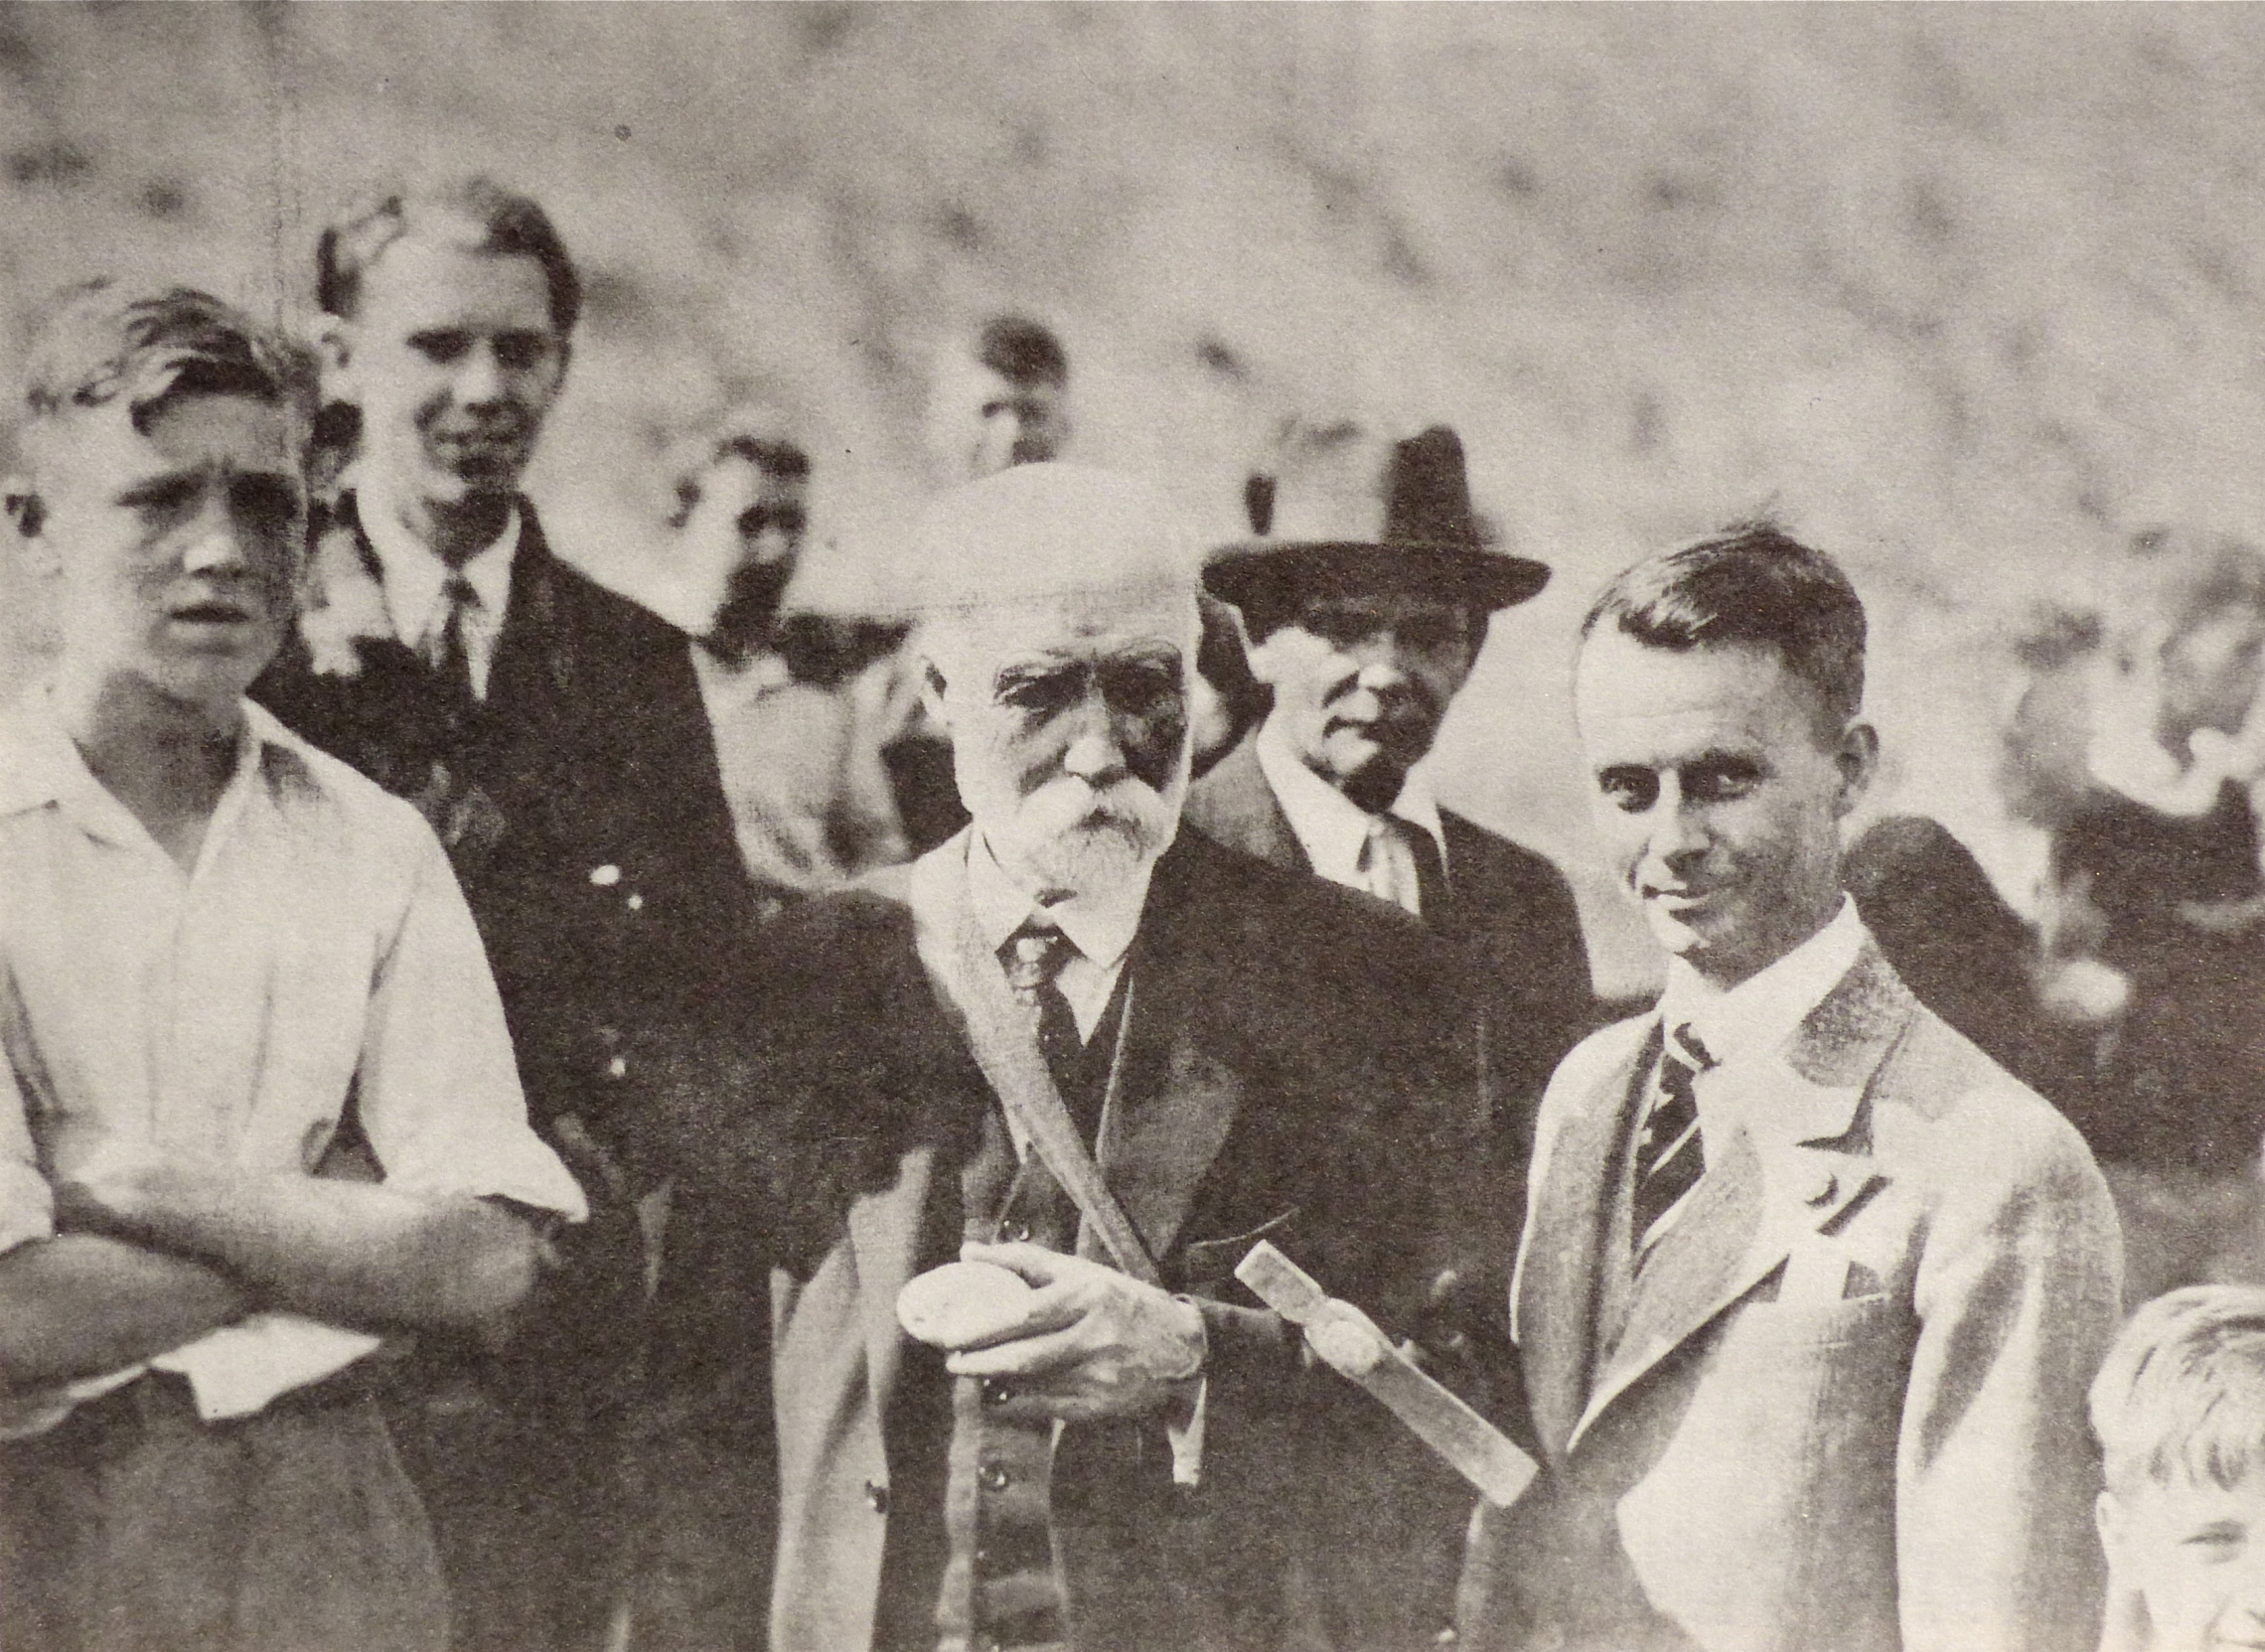 Geologist Dr. A.P. Coleman leading a TFN outing at the Brick Works in 1934